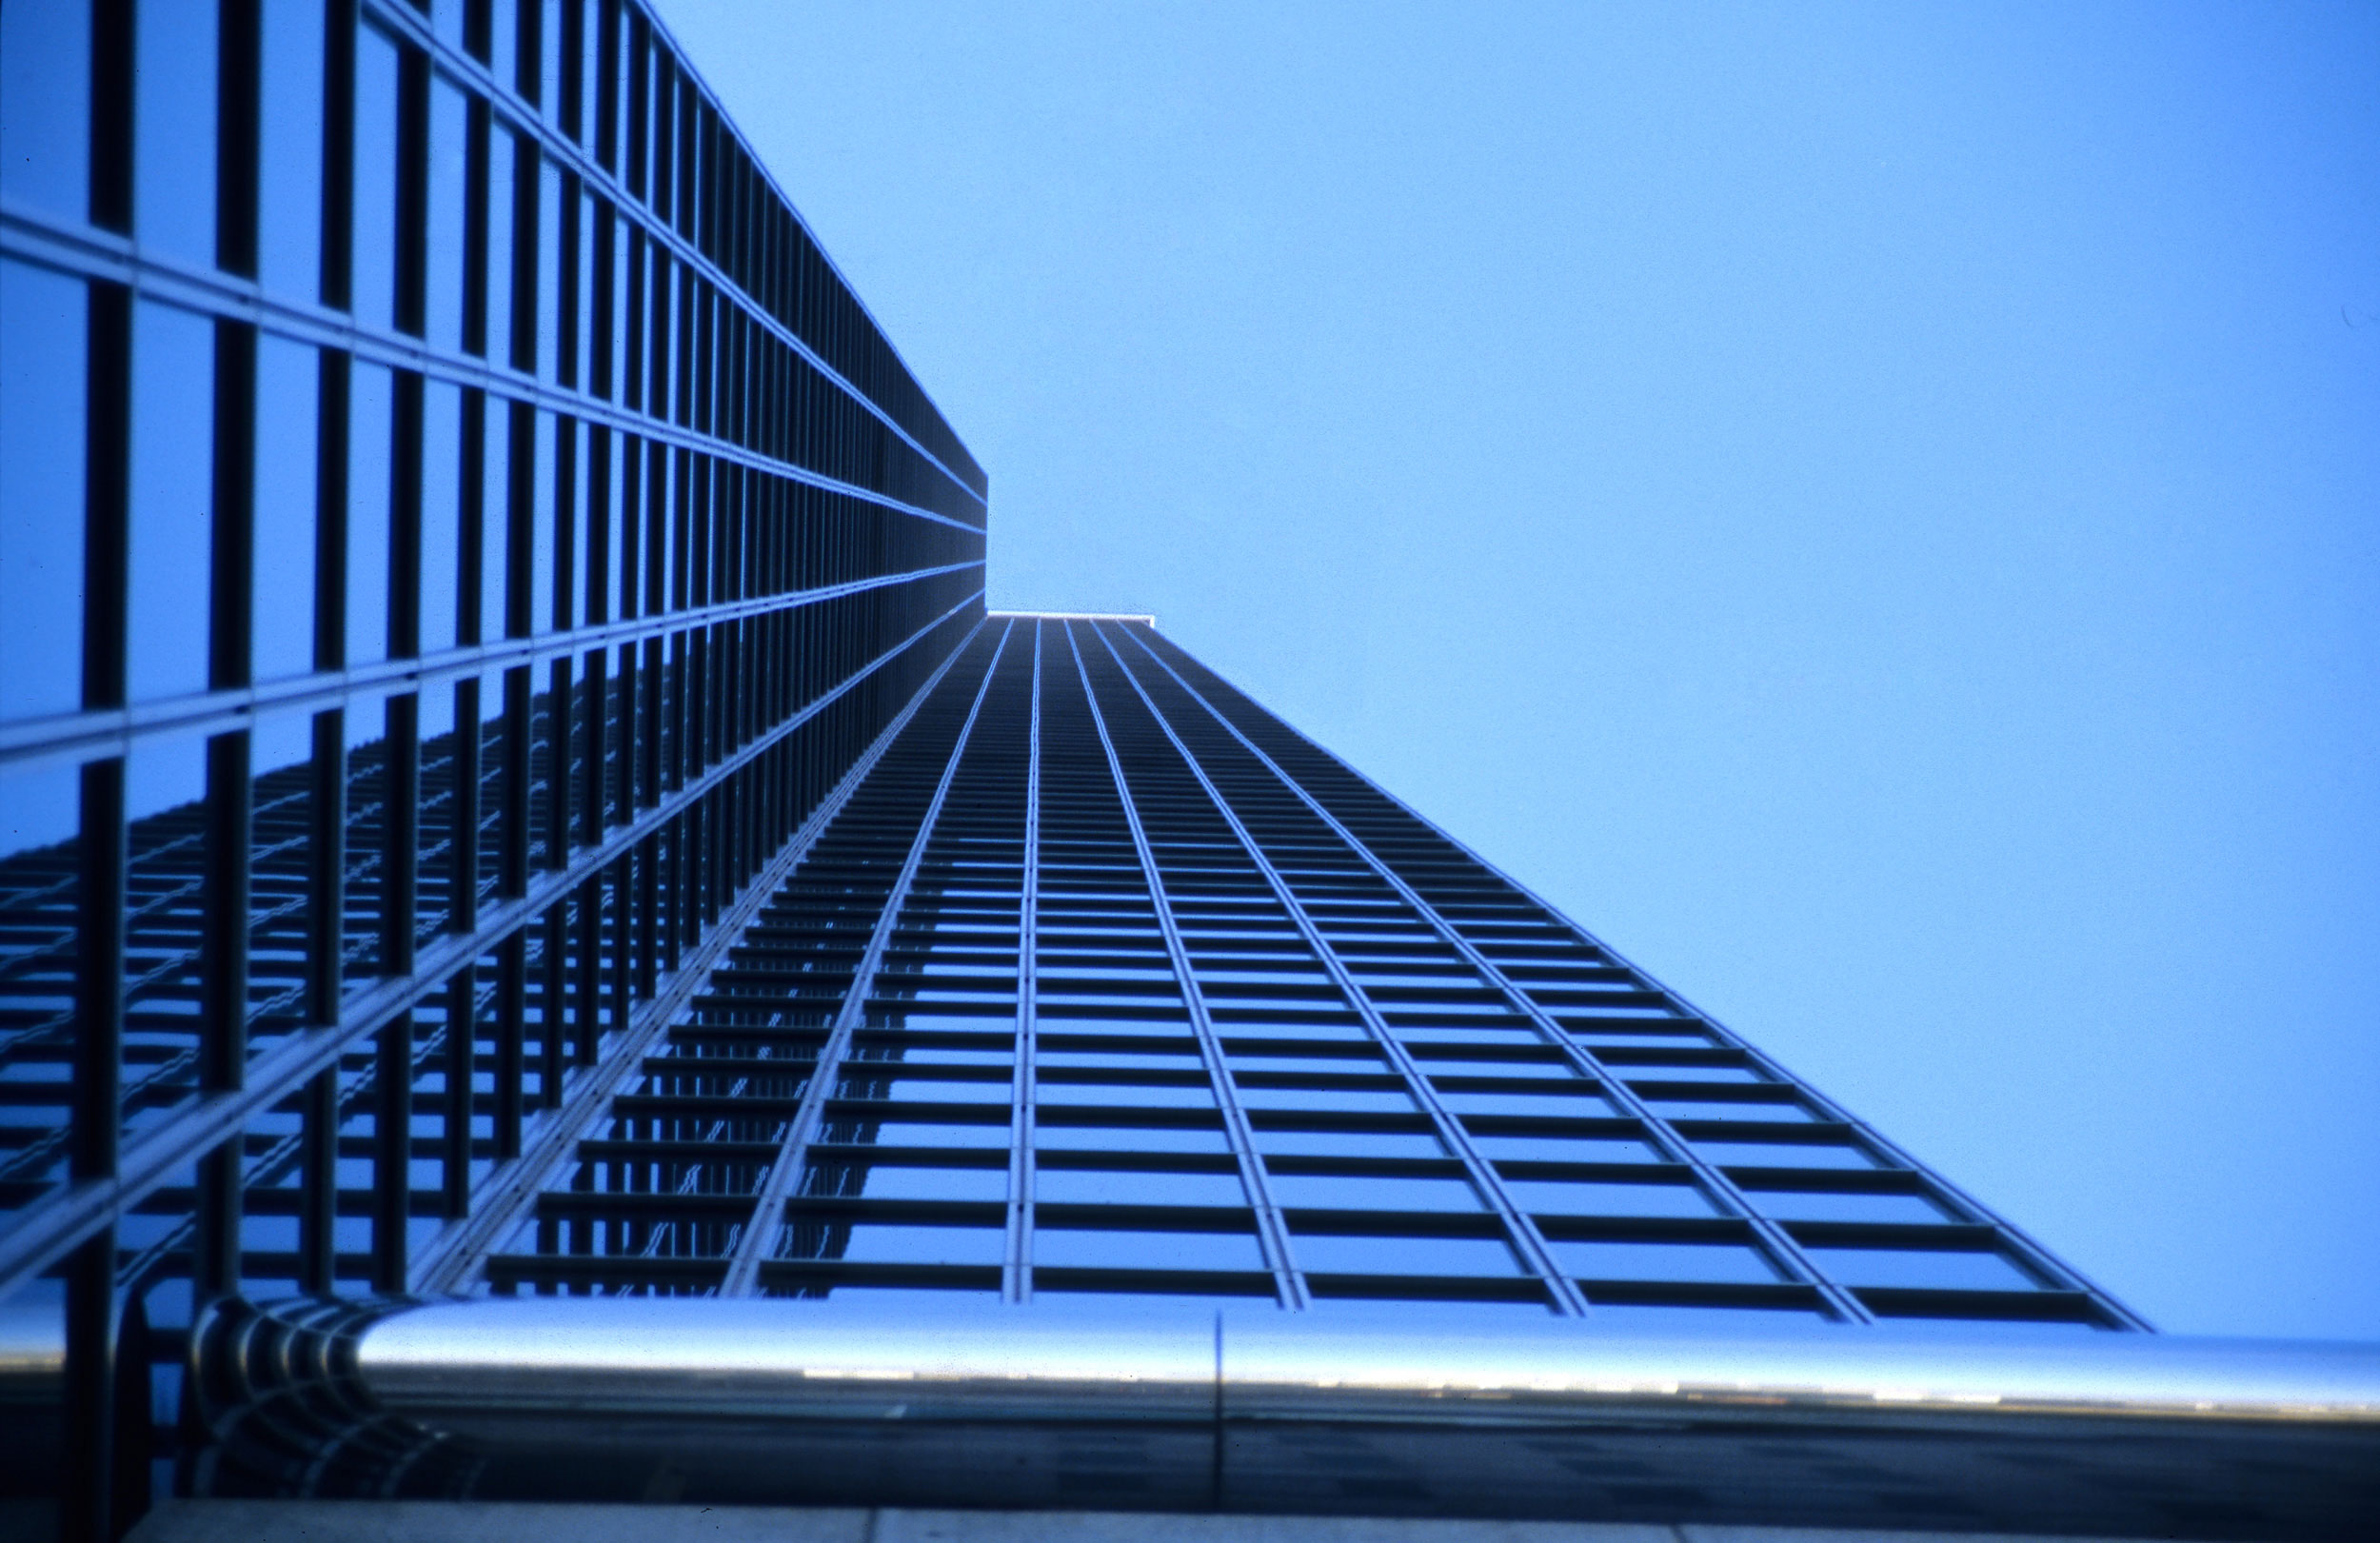 Converging lines image of One California Plaza building